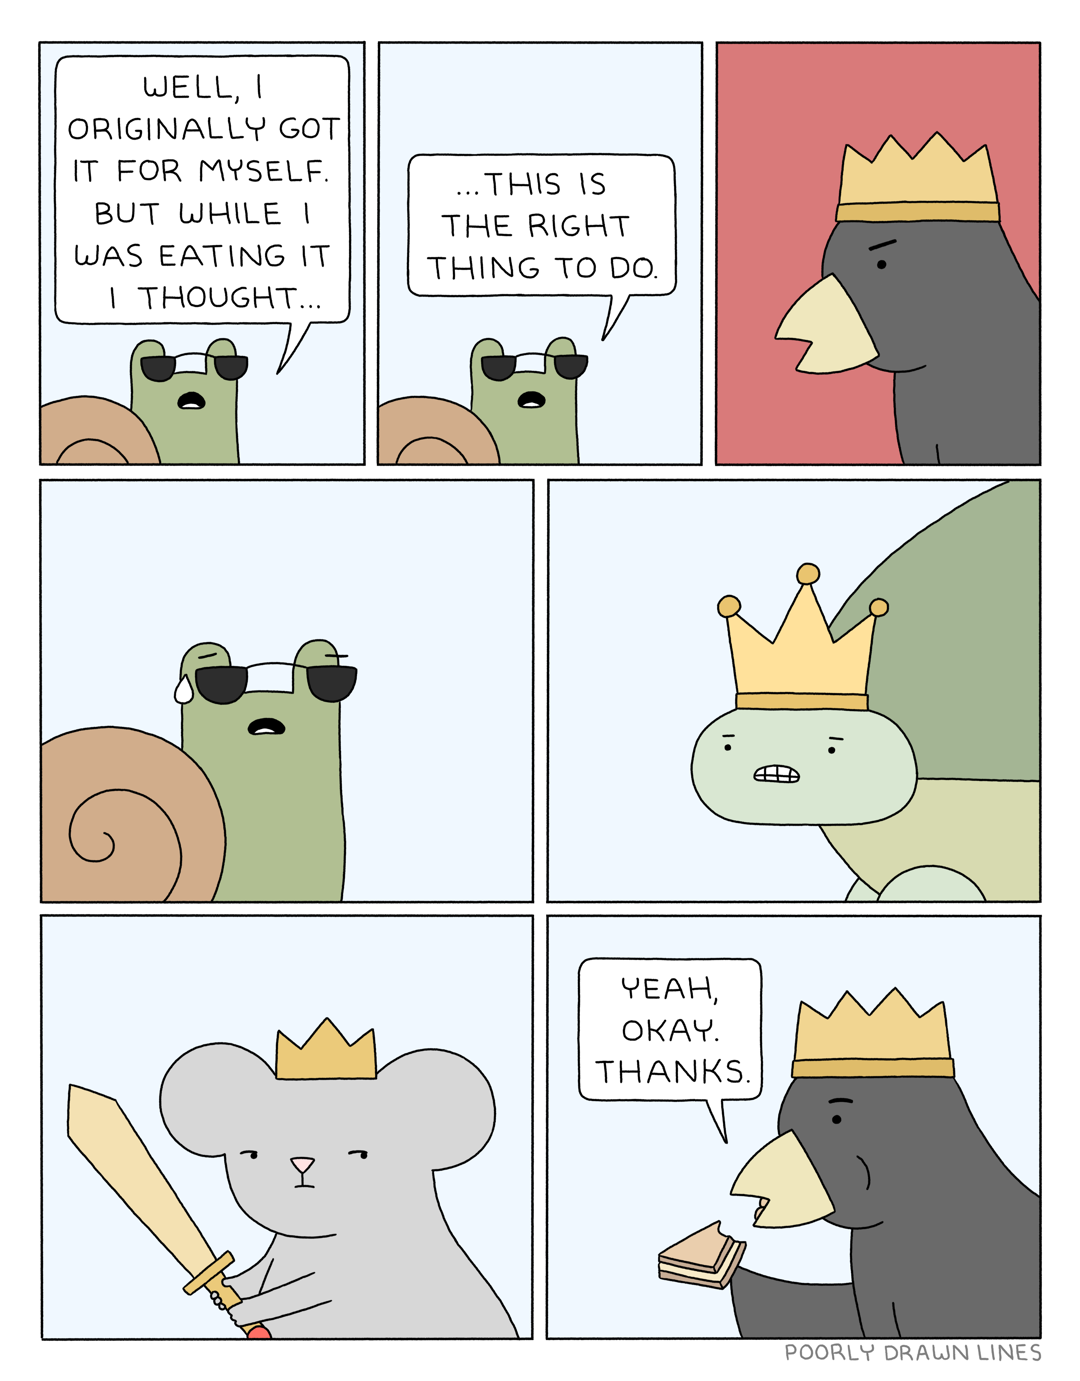 Poorly Drawn Lines — the treasure